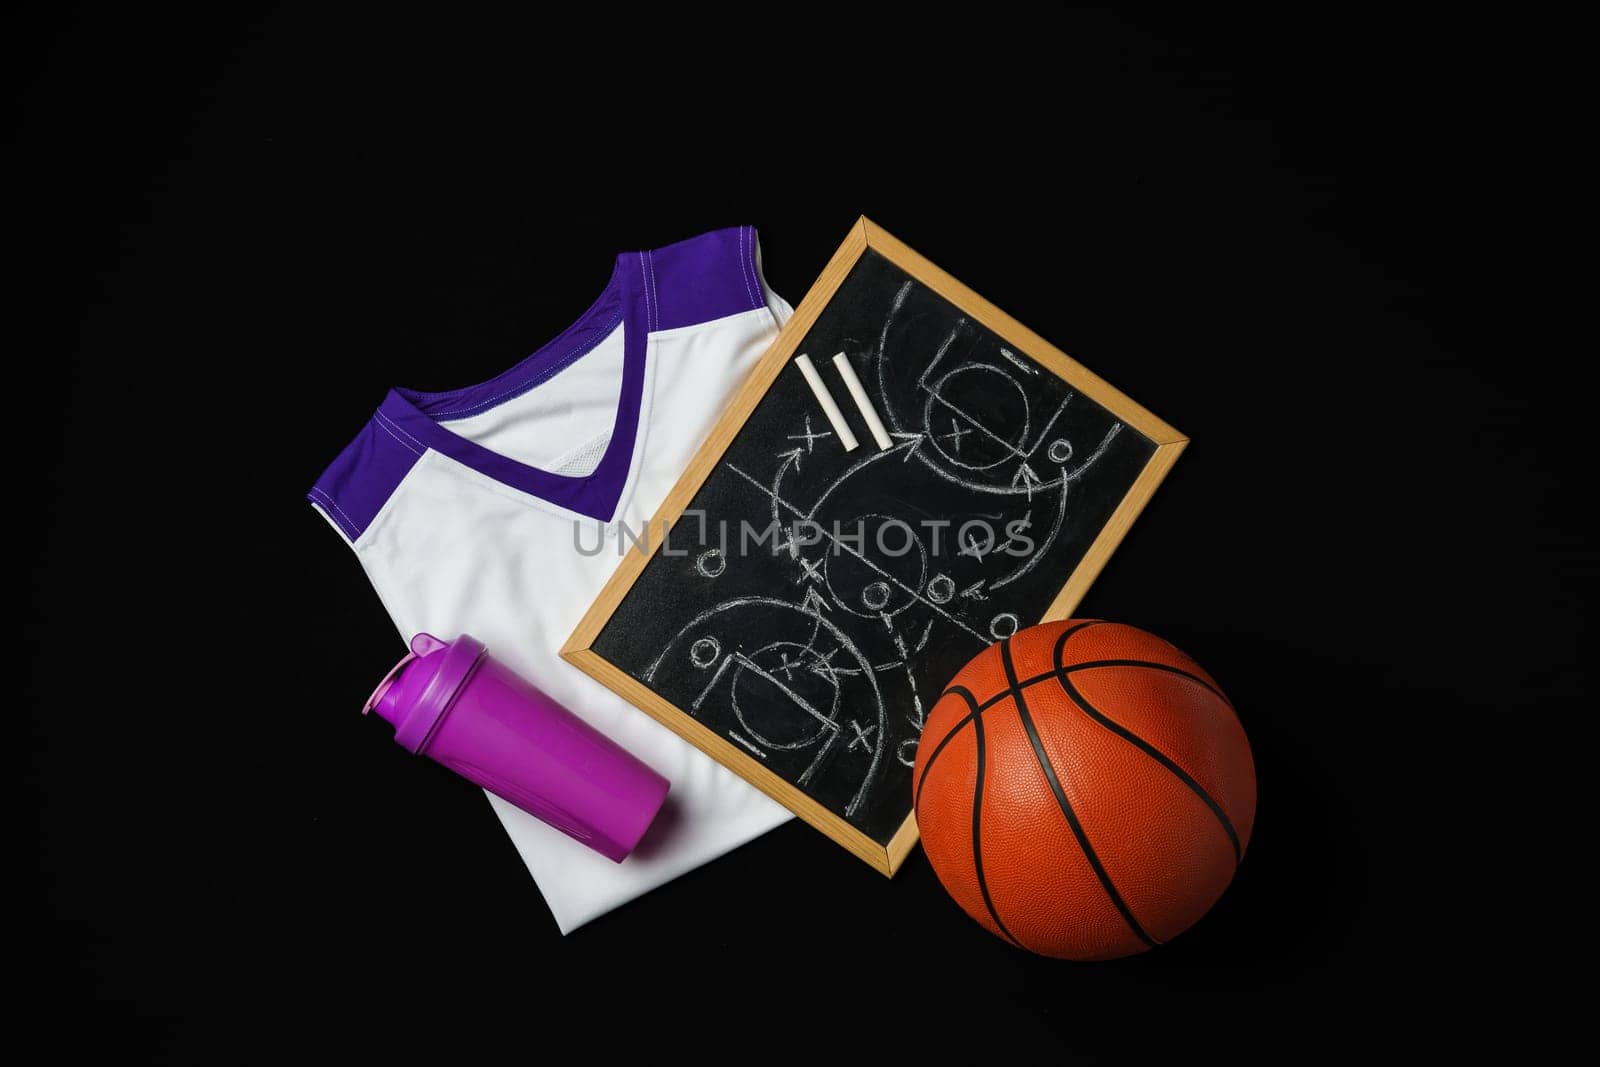 Basketball Strategy Planning With Chalkboard, Ball, and Jersey on Dark Background by Fabrikasimf